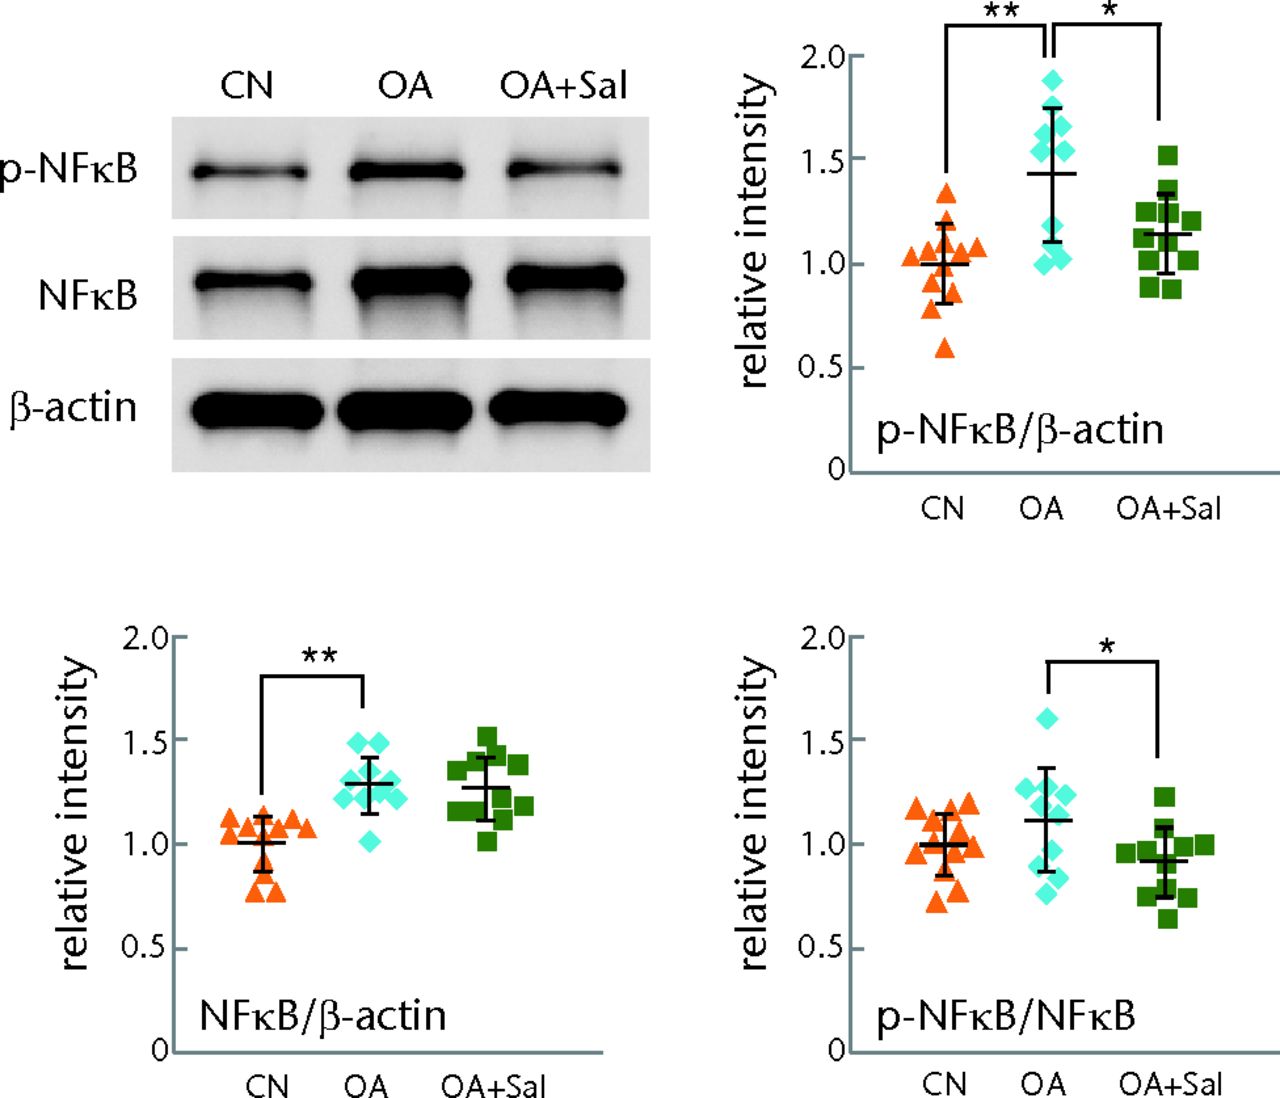 Figs. 5a - 5b 
            Graphs showing suppression of p-nuclear
factor kappa B (p-NFκB) p65 and activity of matrix metalloproteinase
13 (MMP13) by Salubrinal in a mouse model of osteoarthritis; (n
= 12 CN, sham control, 10 OA placebo, and 11 OA + Salubrinal (Sal)),
with a) attenuation of the level of p-NFκB p65 by Sal and b) suppression
of activity of MMP13 by Sal shown.
          